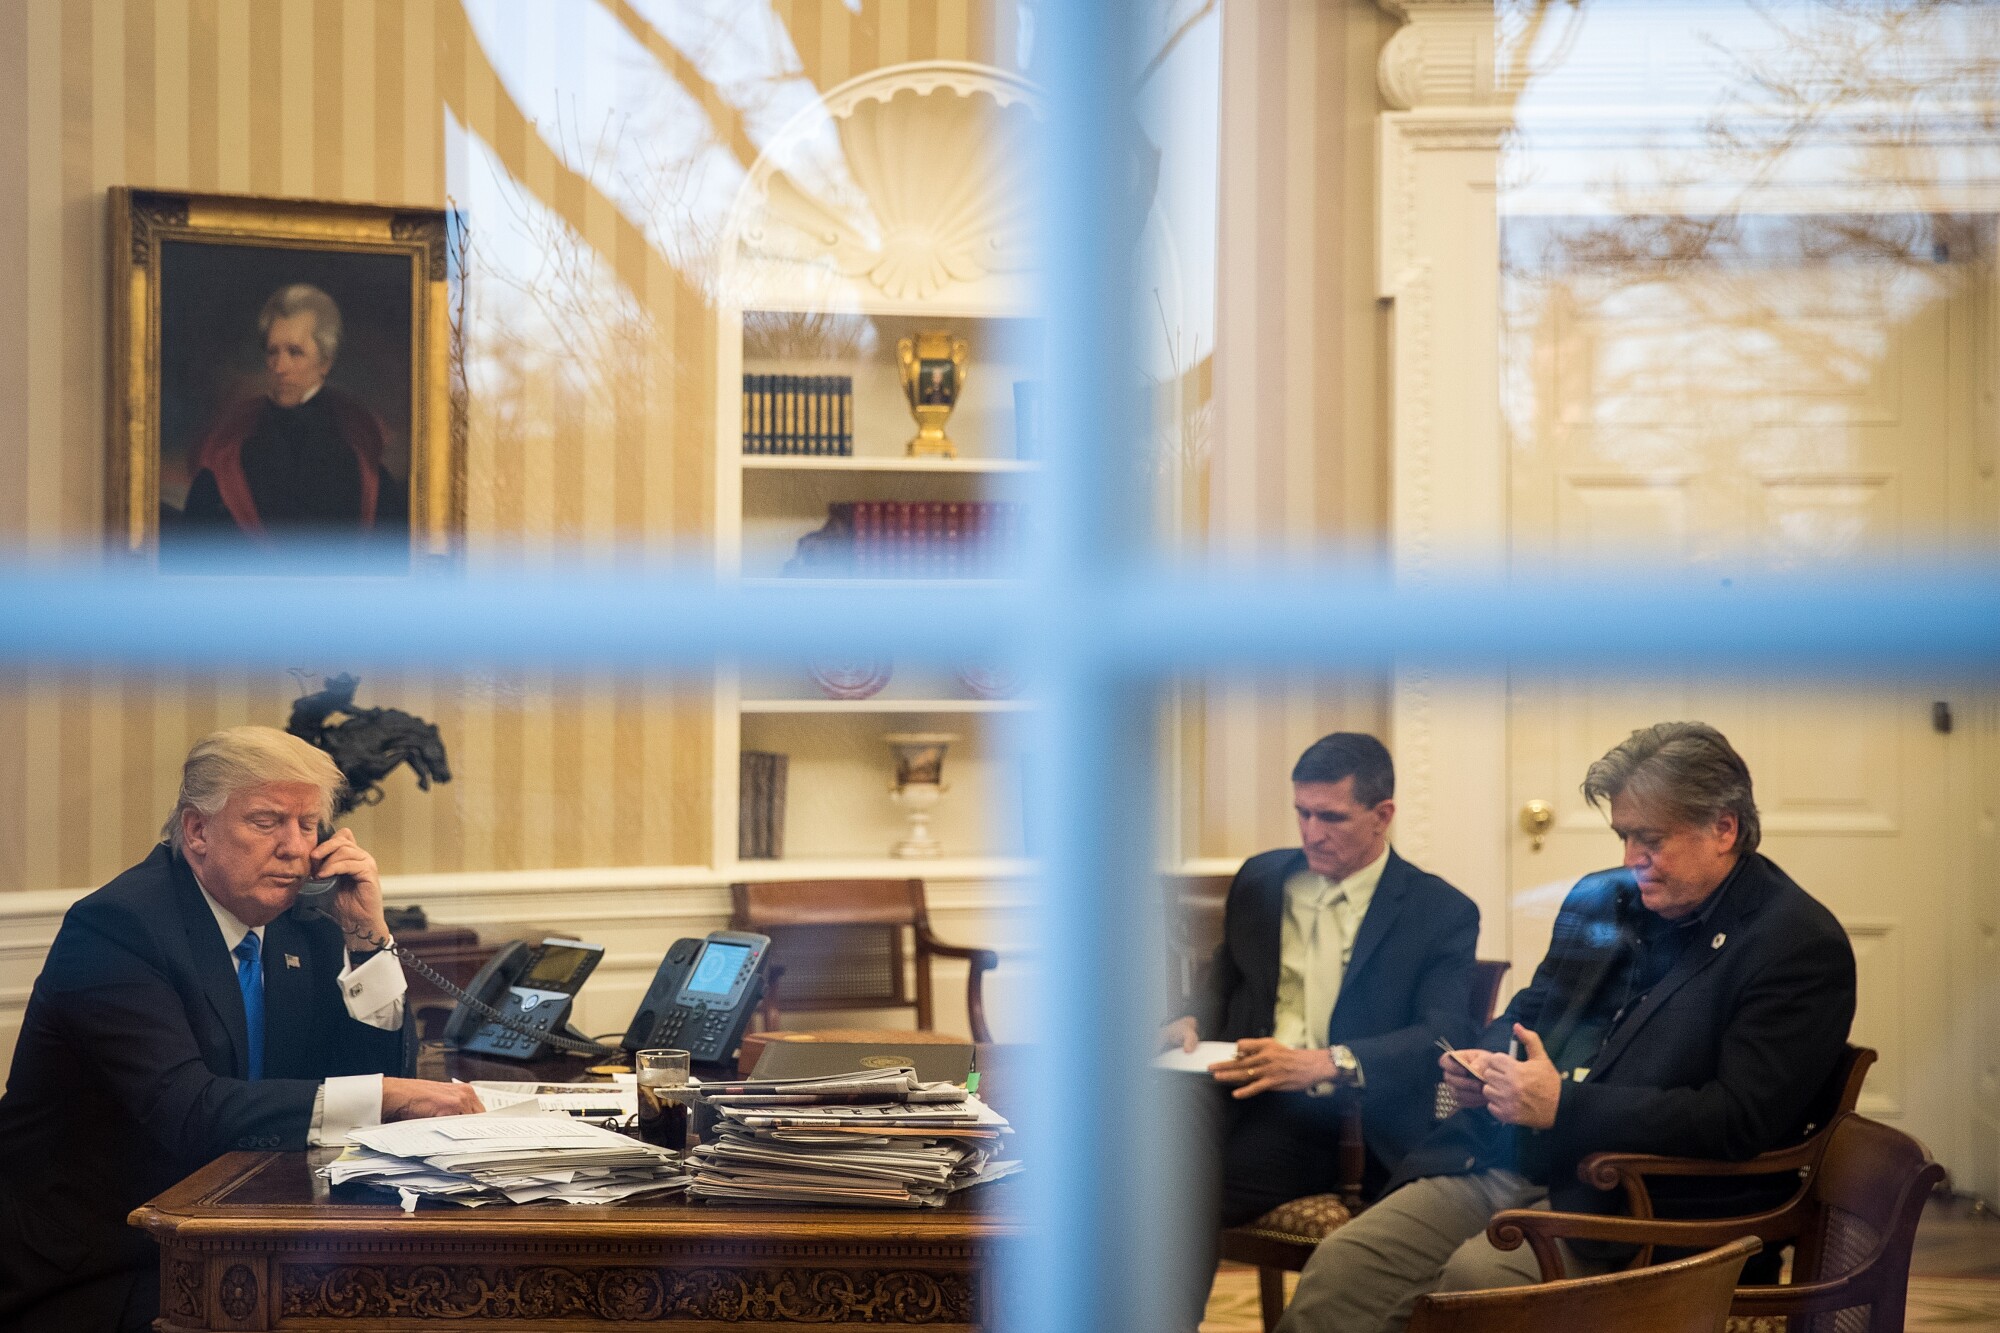 Donald Trump, Michael Flynn and Stephen Bannon are seen through a window